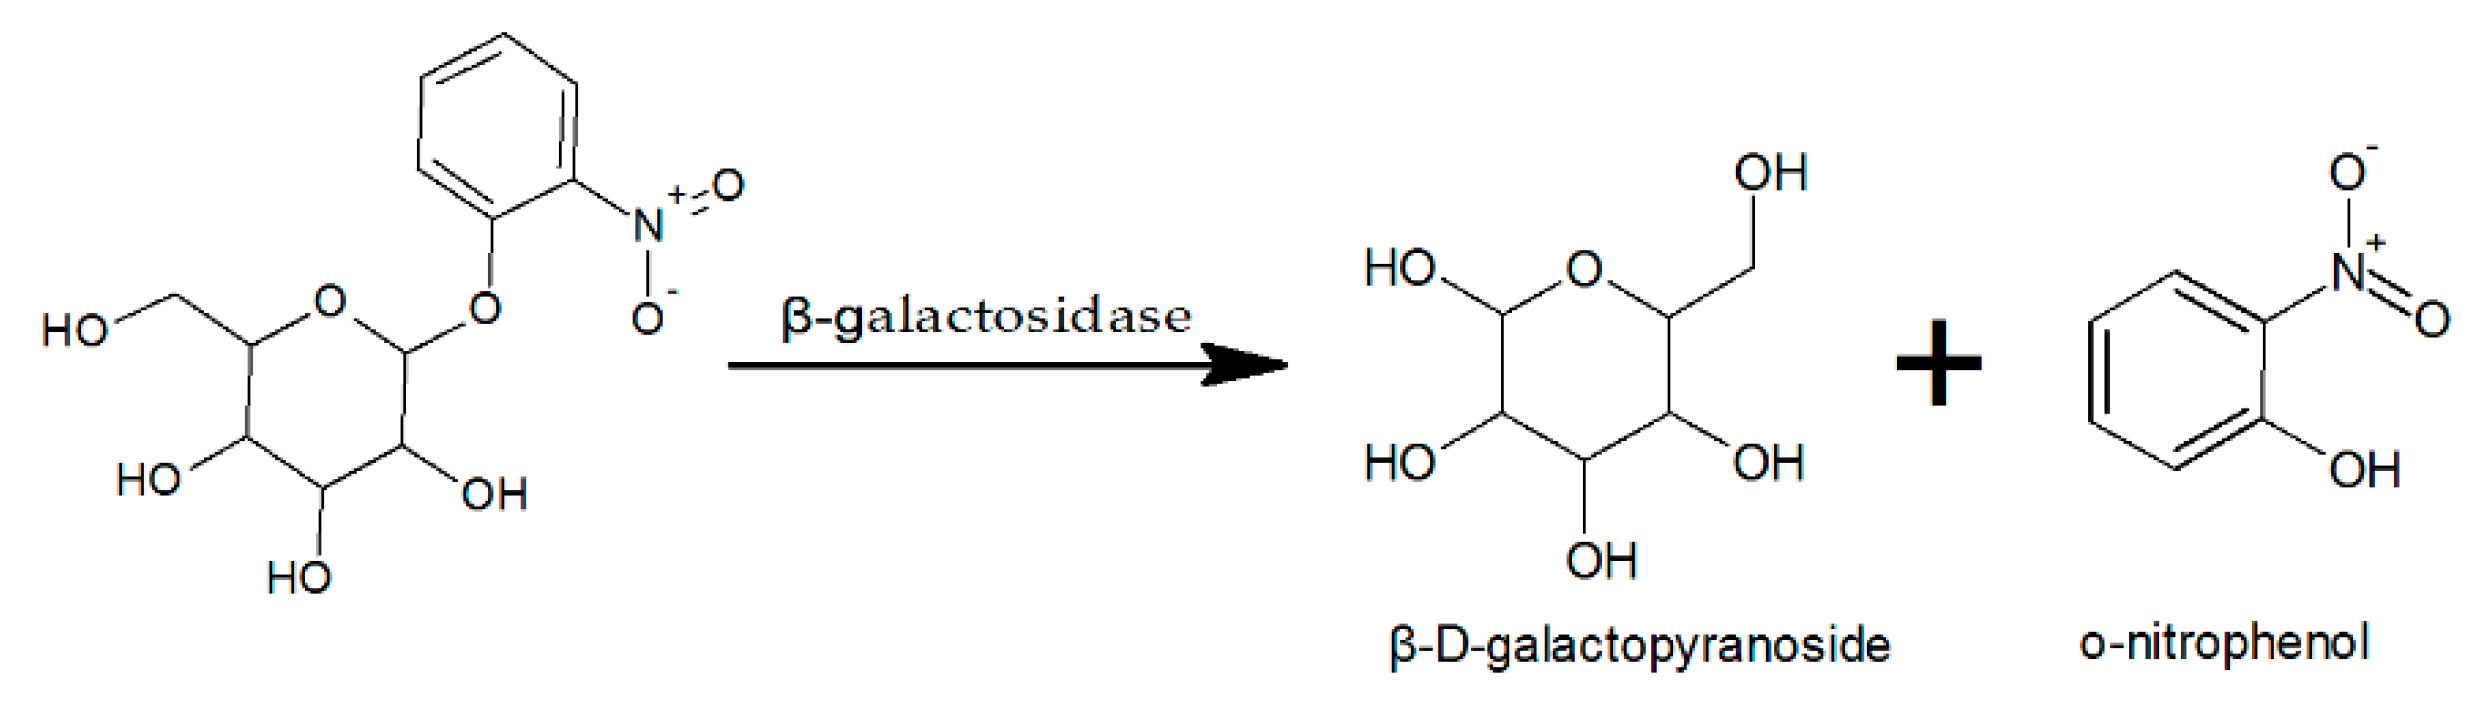 Fermentation Free Full Text Optimization Of B Galactosidase Production By Batch Cultures Of Lactobacillus Leichmannii 313 Atcc 70 Html